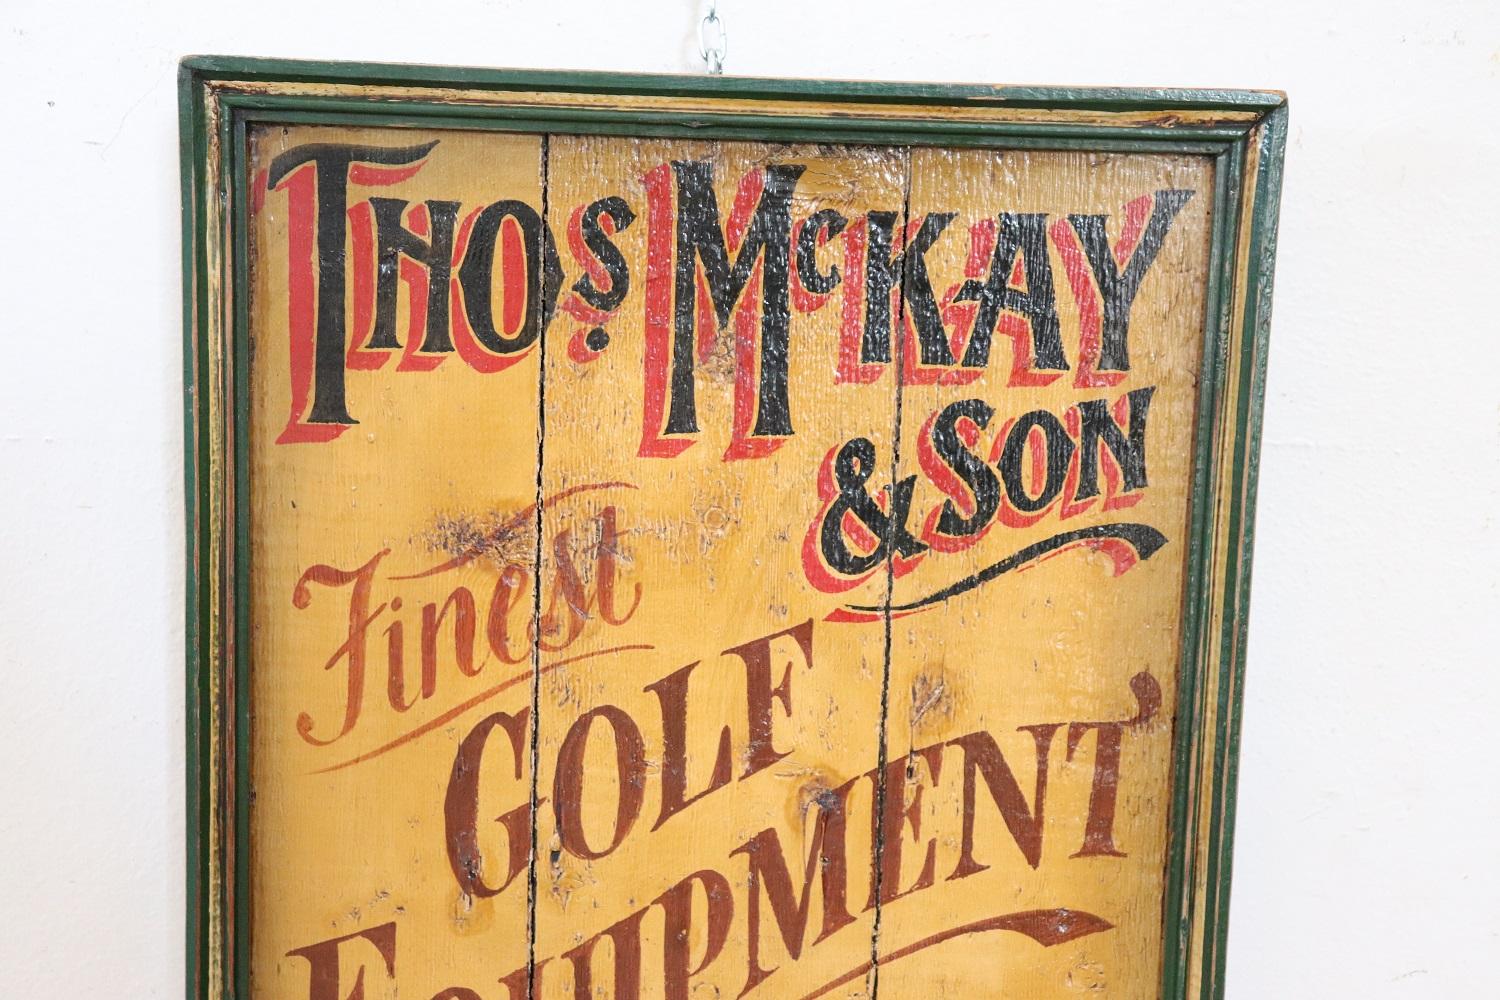 This vintage sign for collectors is truly special. Made of wood with relief decorations and hand painted. The advertising sign was dedicated to the golf attire and equipment.